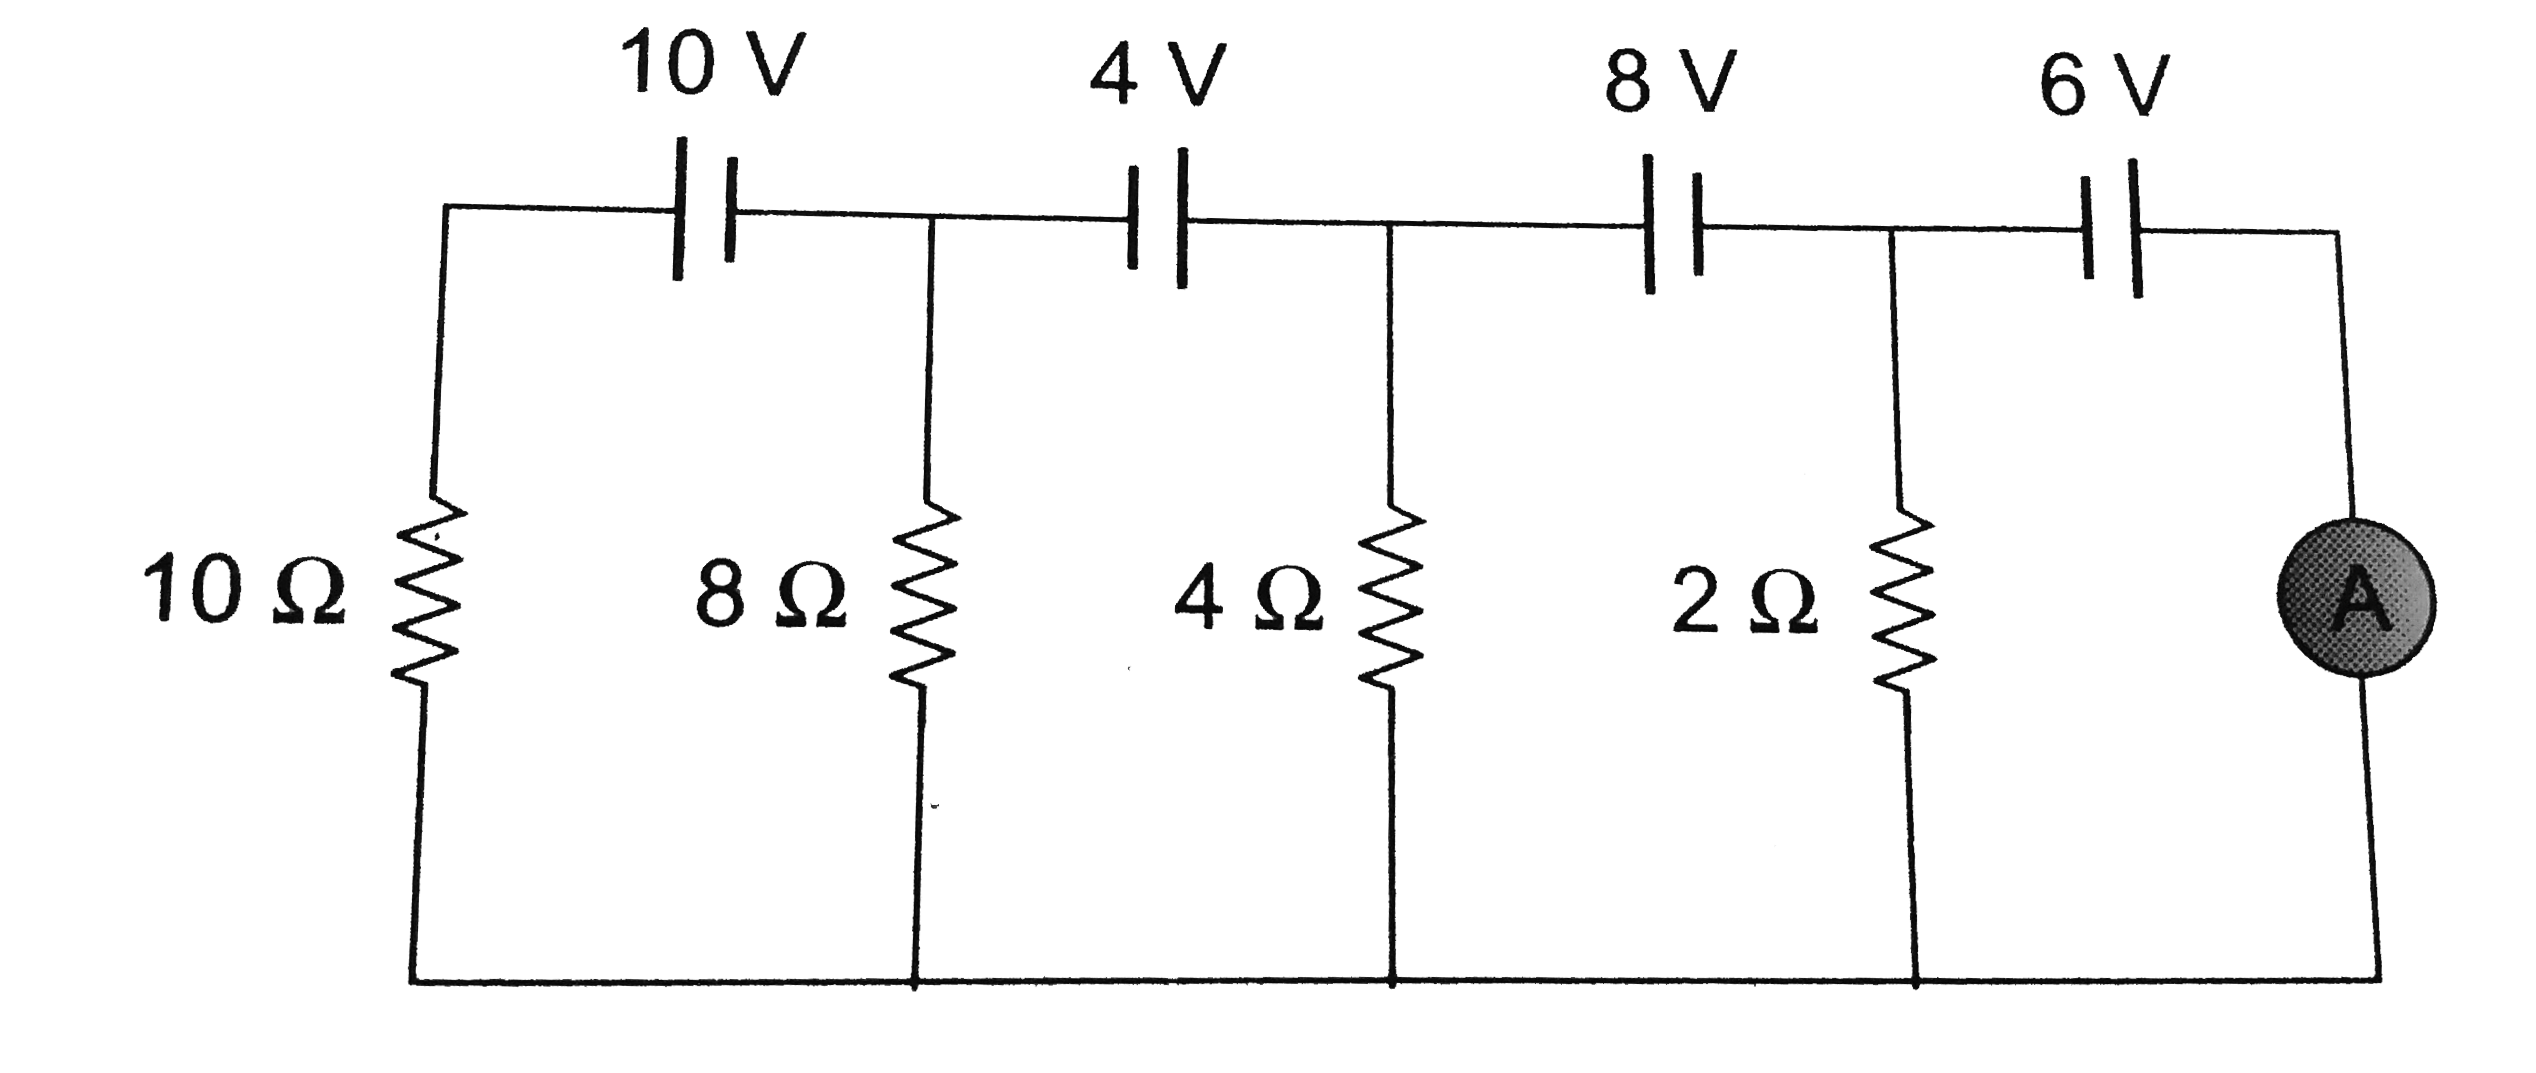 Find the reading of the ideal ammeter connected in the given circuit. Assume that the cells have negligible internal resistance.